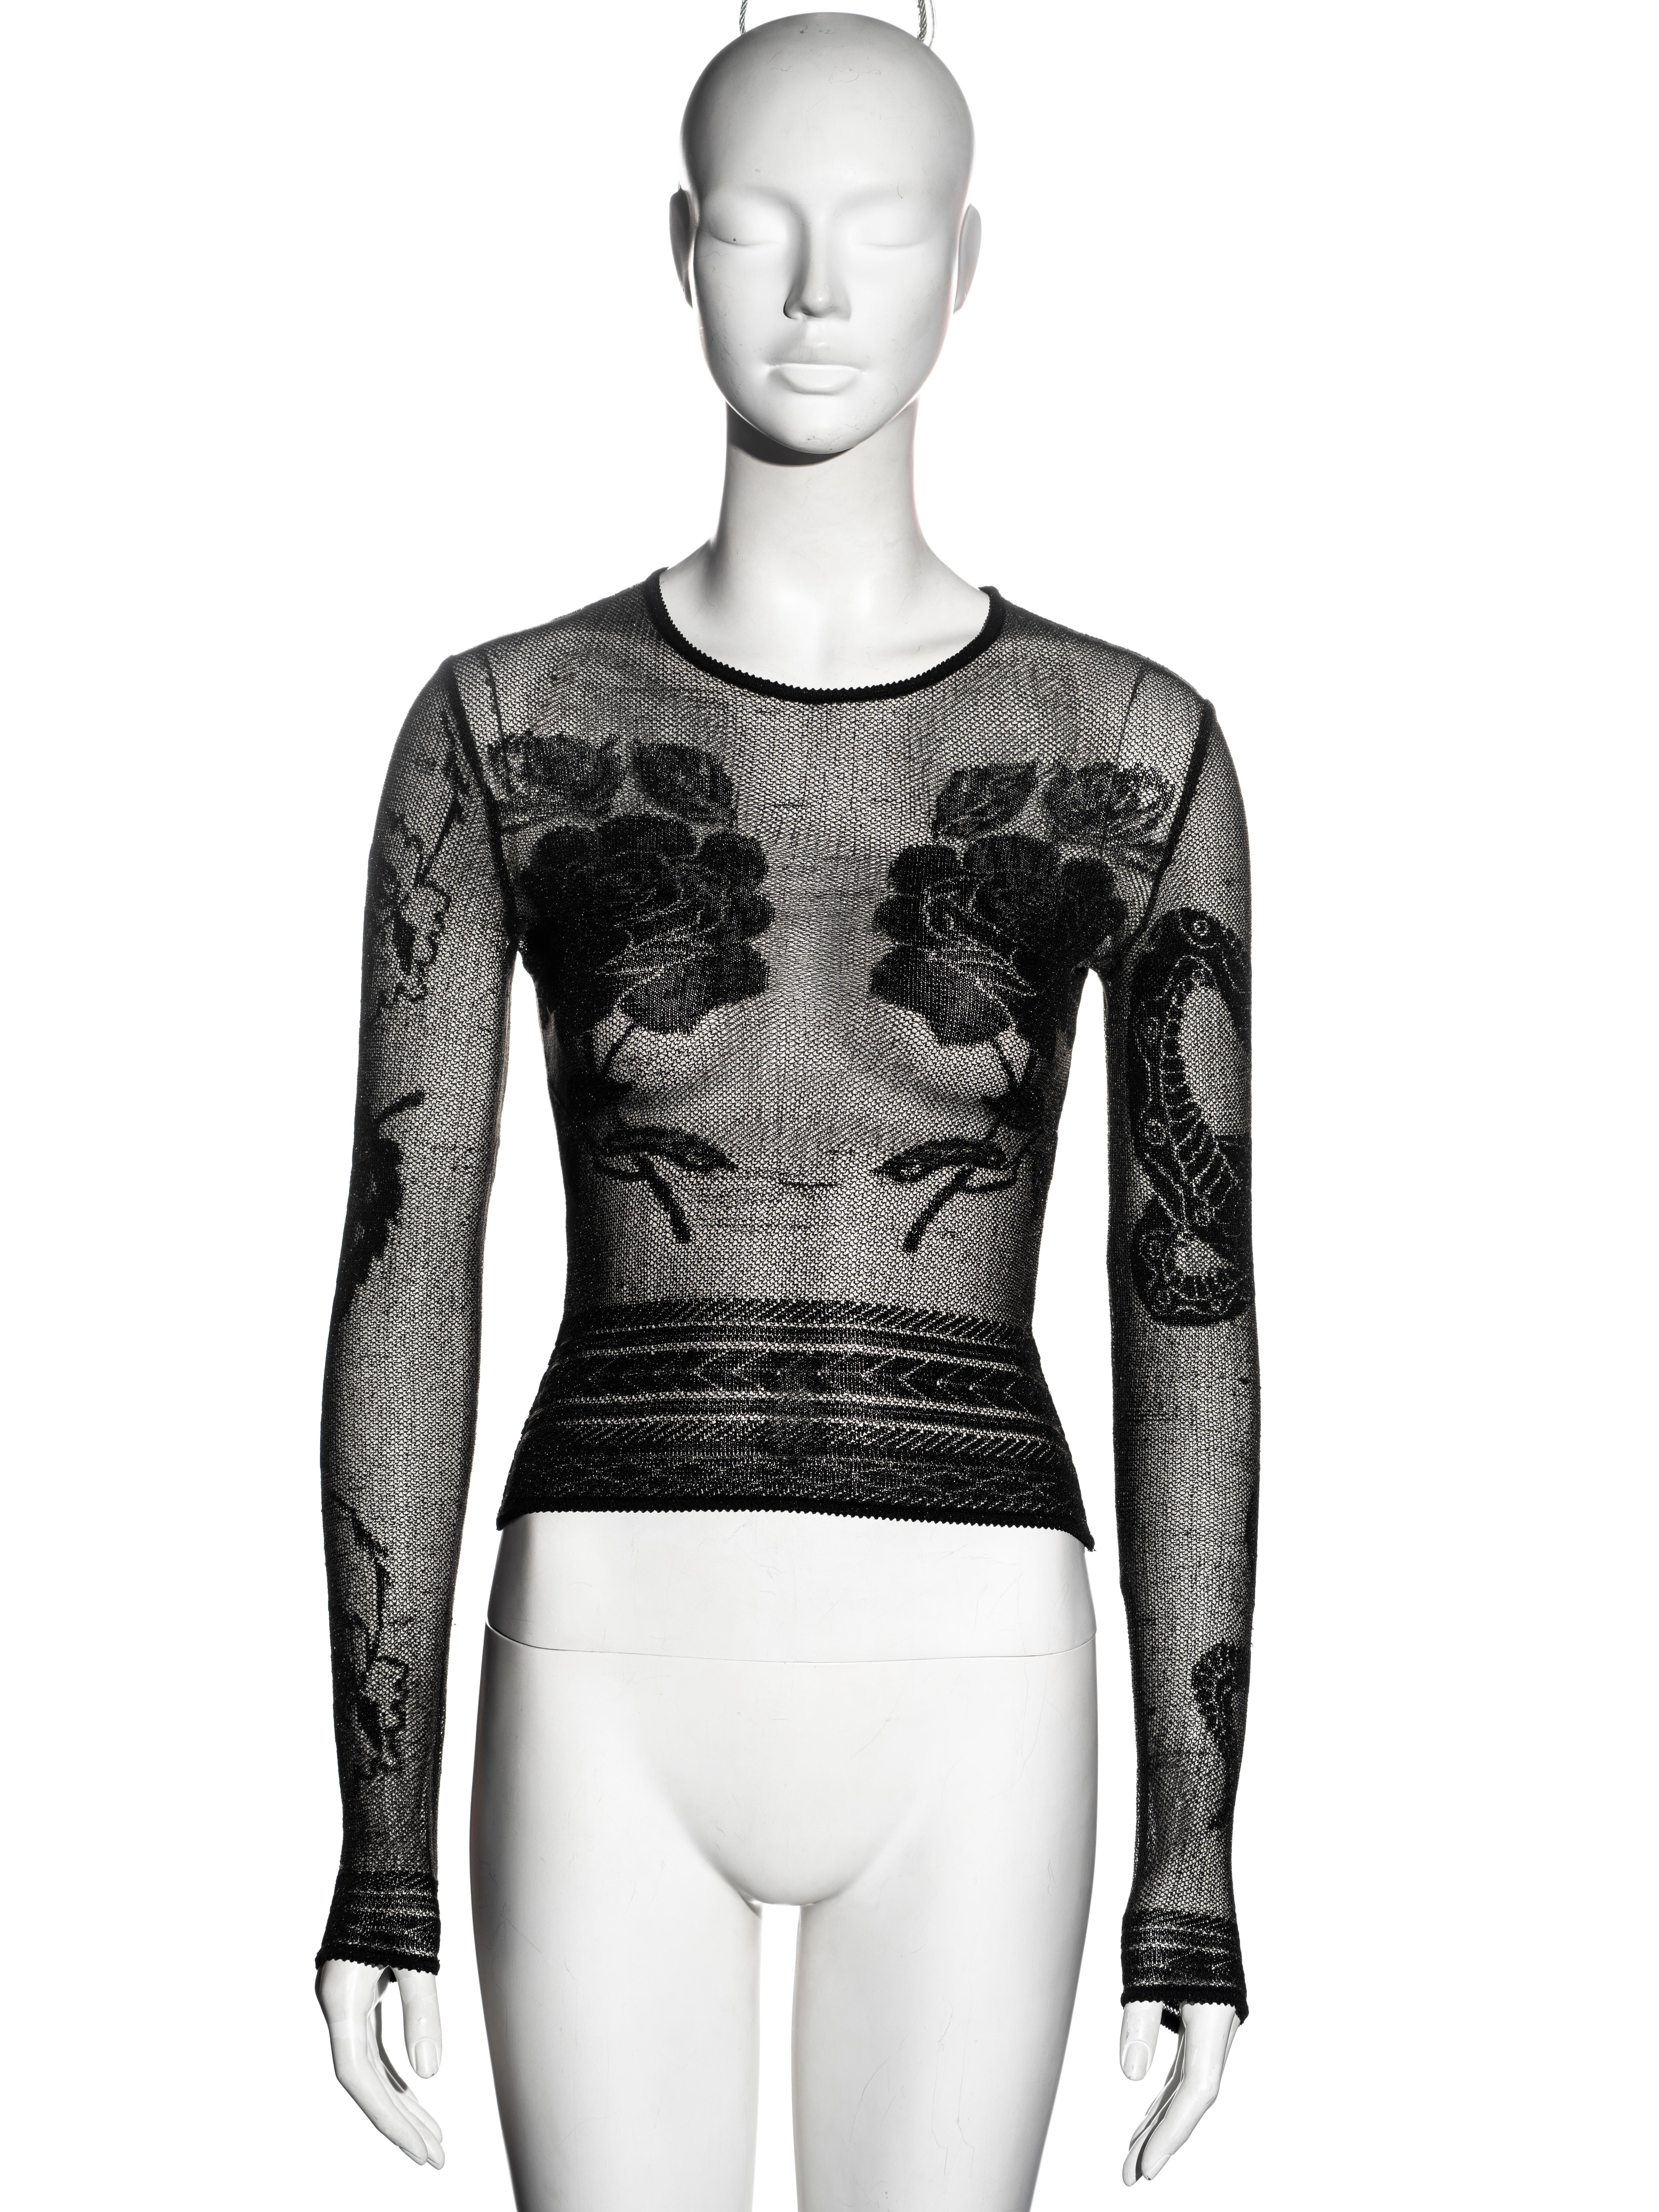 ▪ Rare John Galliano long-sleeve top
▪ Black sheer knit with tattoo designs 
▪ Skin-tight 
▪ Size Small
▪ Fall-Winter 1997
▪ Made in France